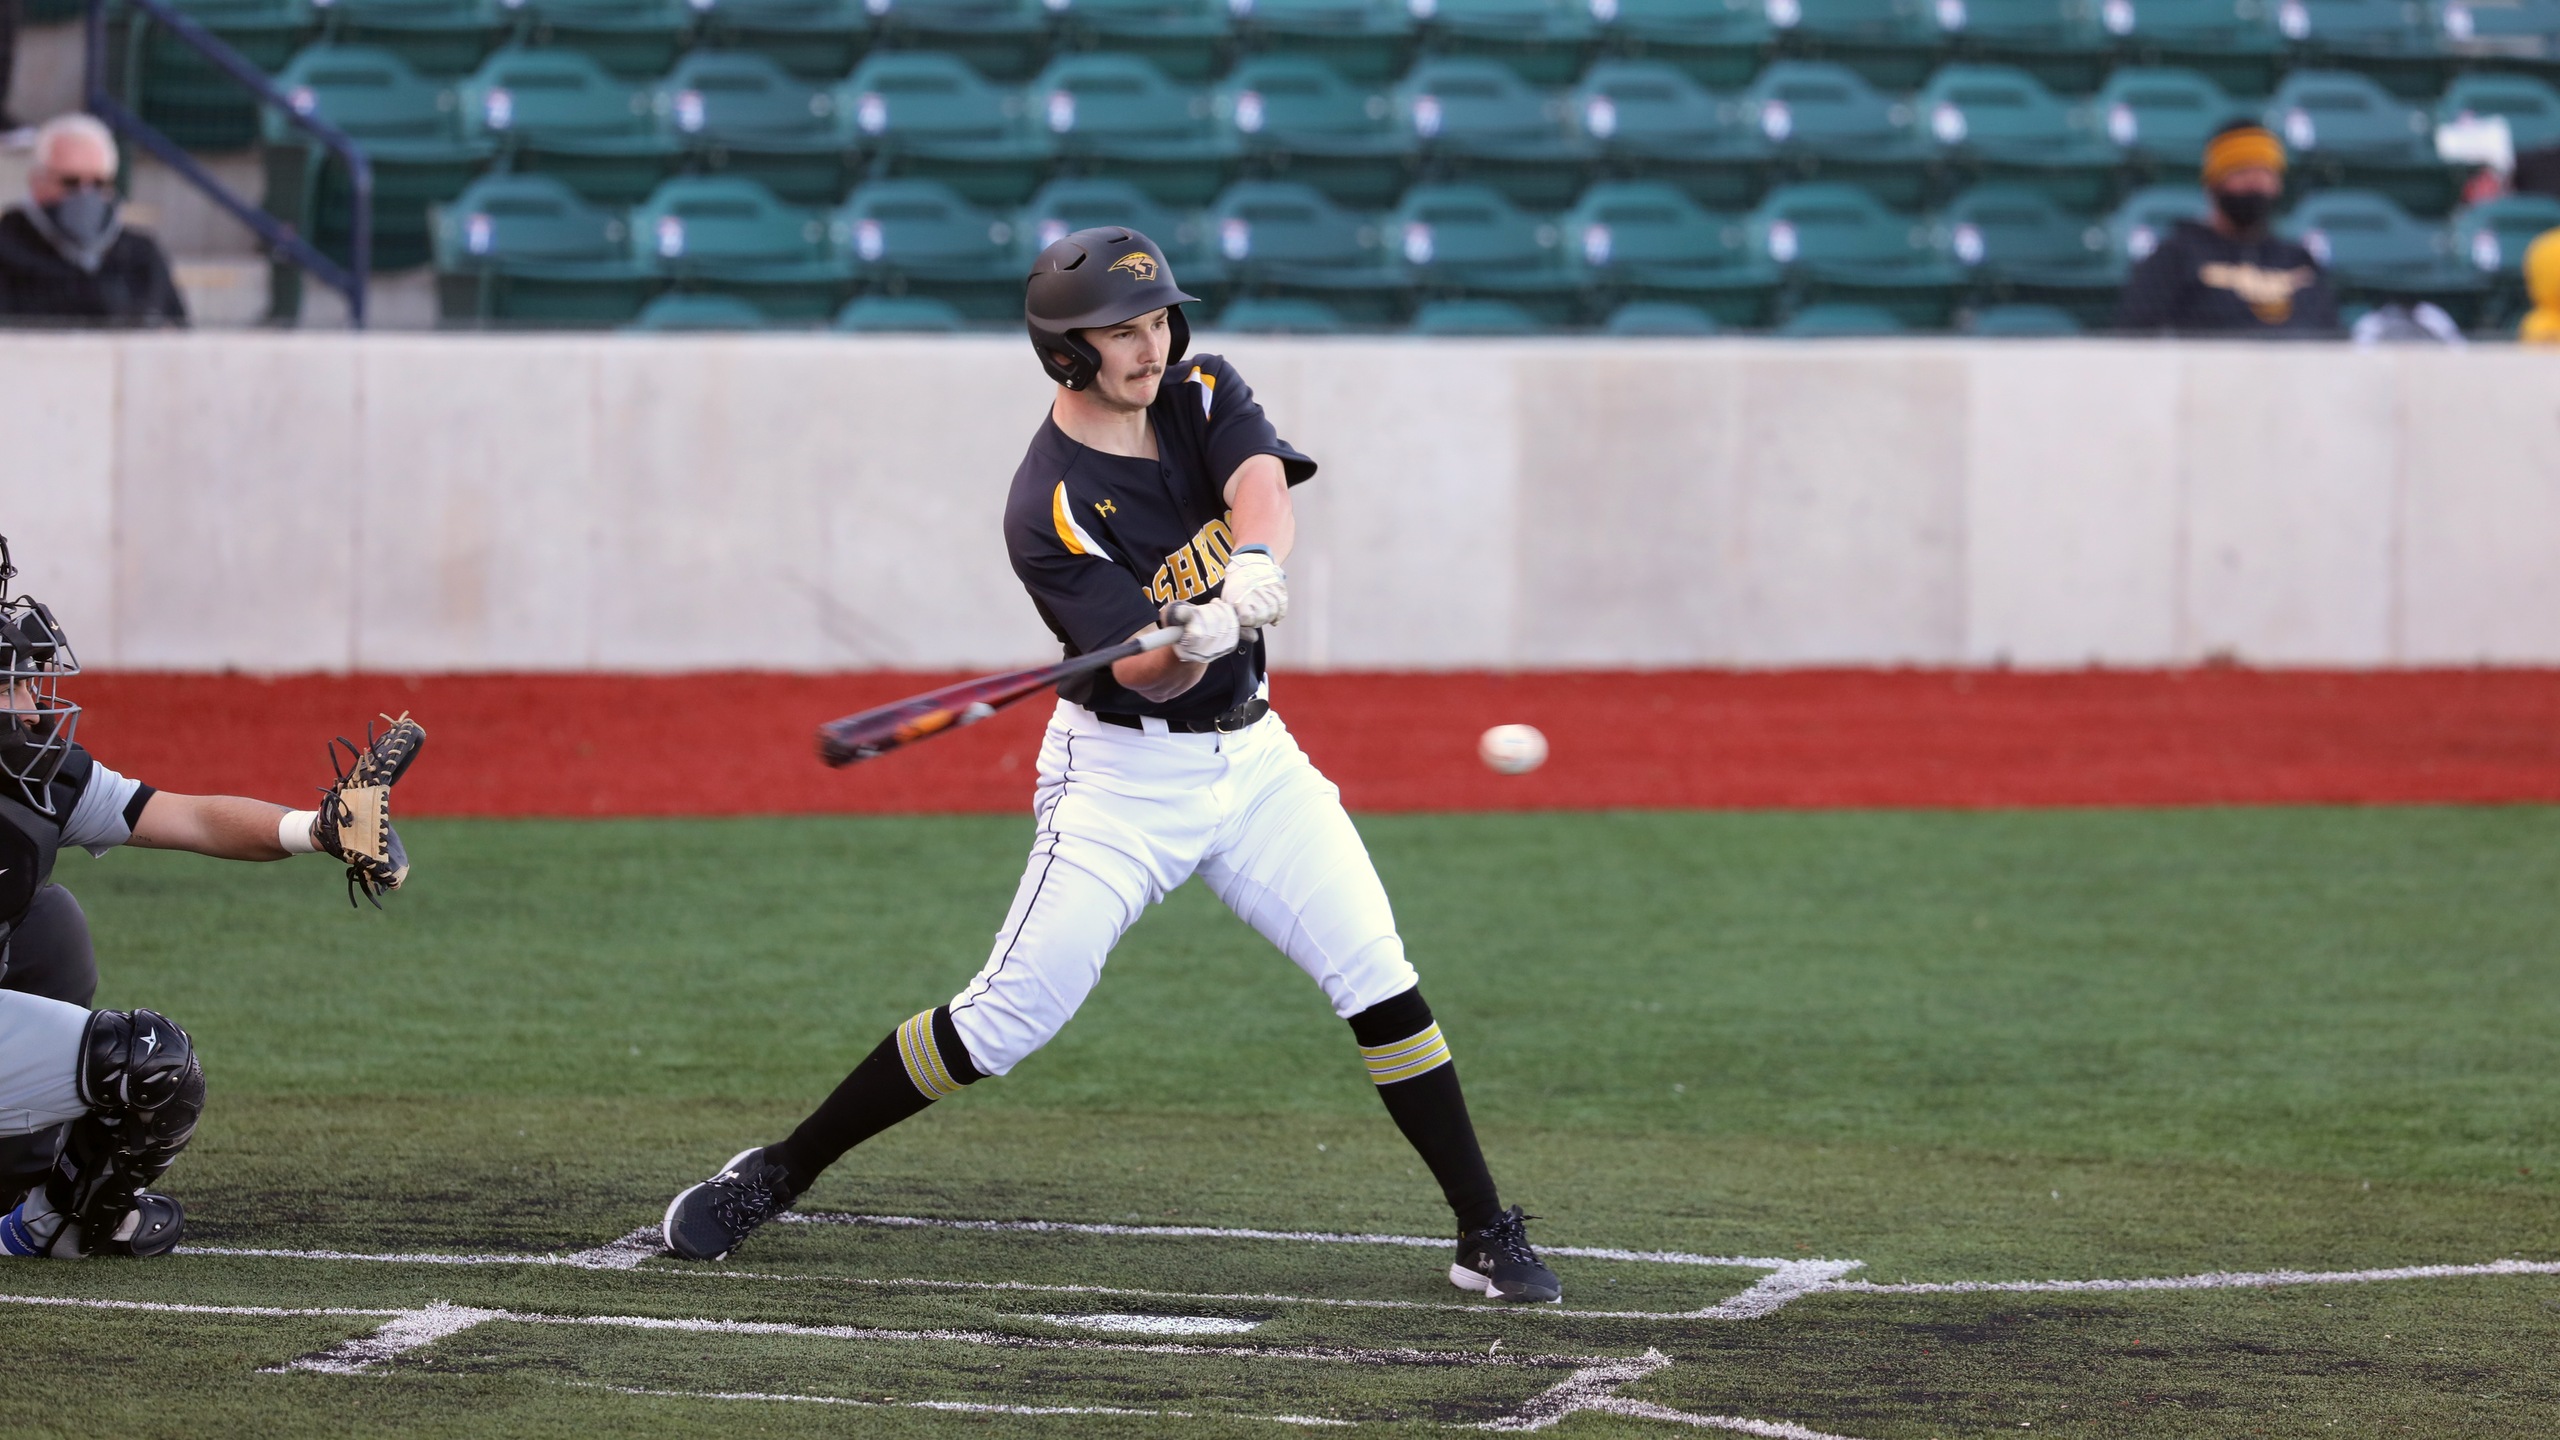 Jarrett Scheelk was the winning pitcher in the second game and went 5-for-7 at the plate with five runs batted in during UW-Oshkosh's doubleheader against the Lions.